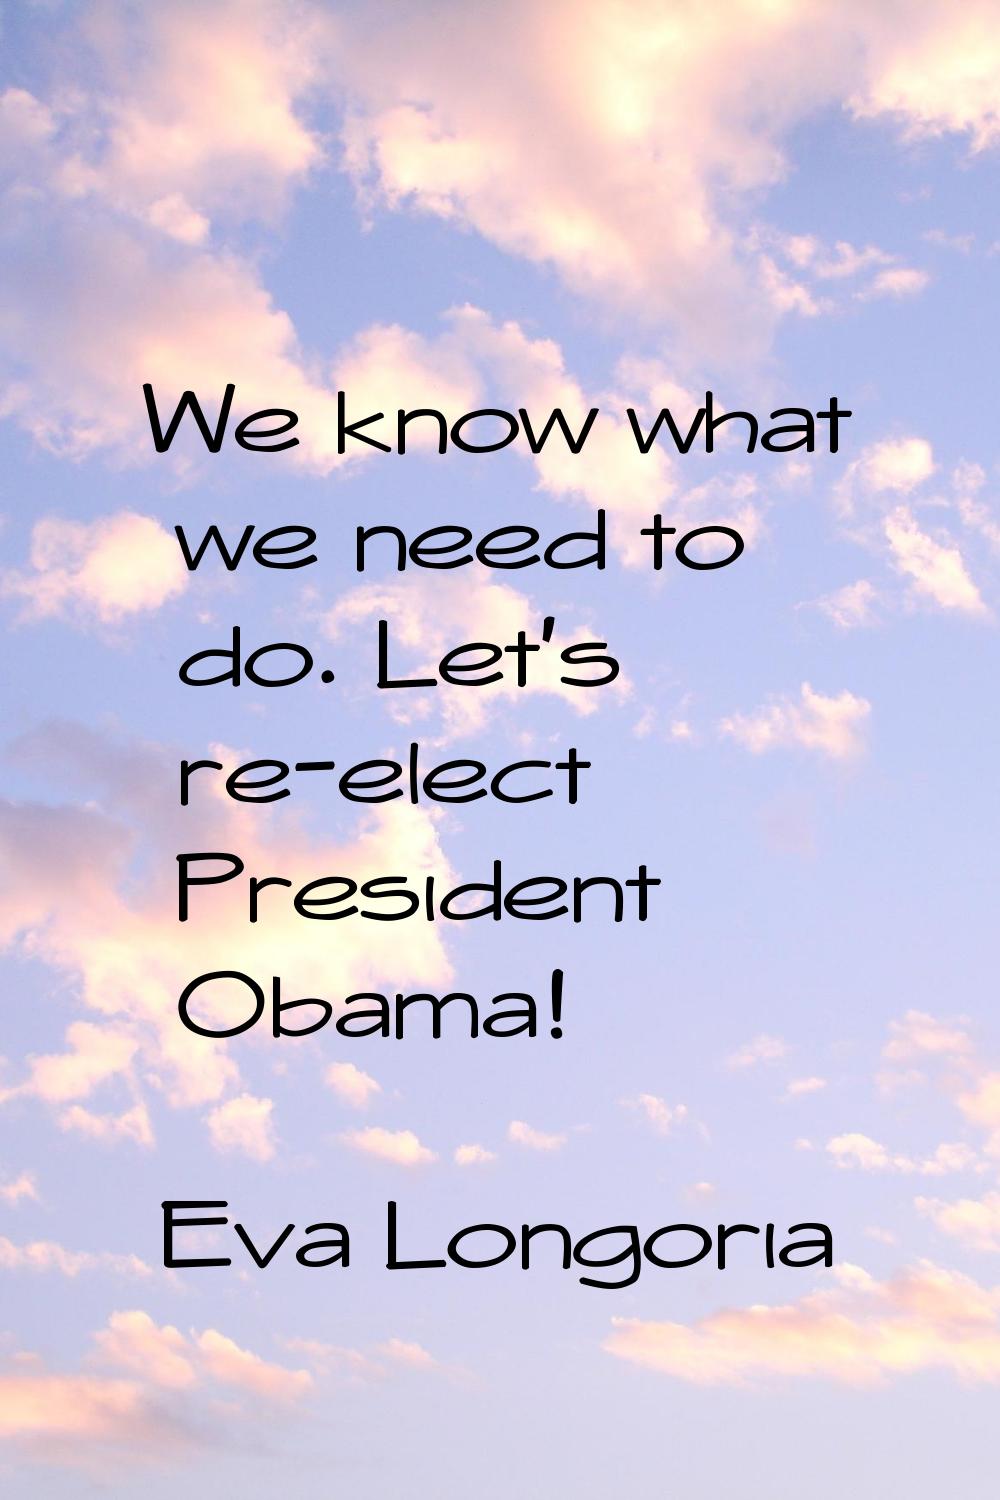 We know what we need to do. Let's re-elect President Obama!